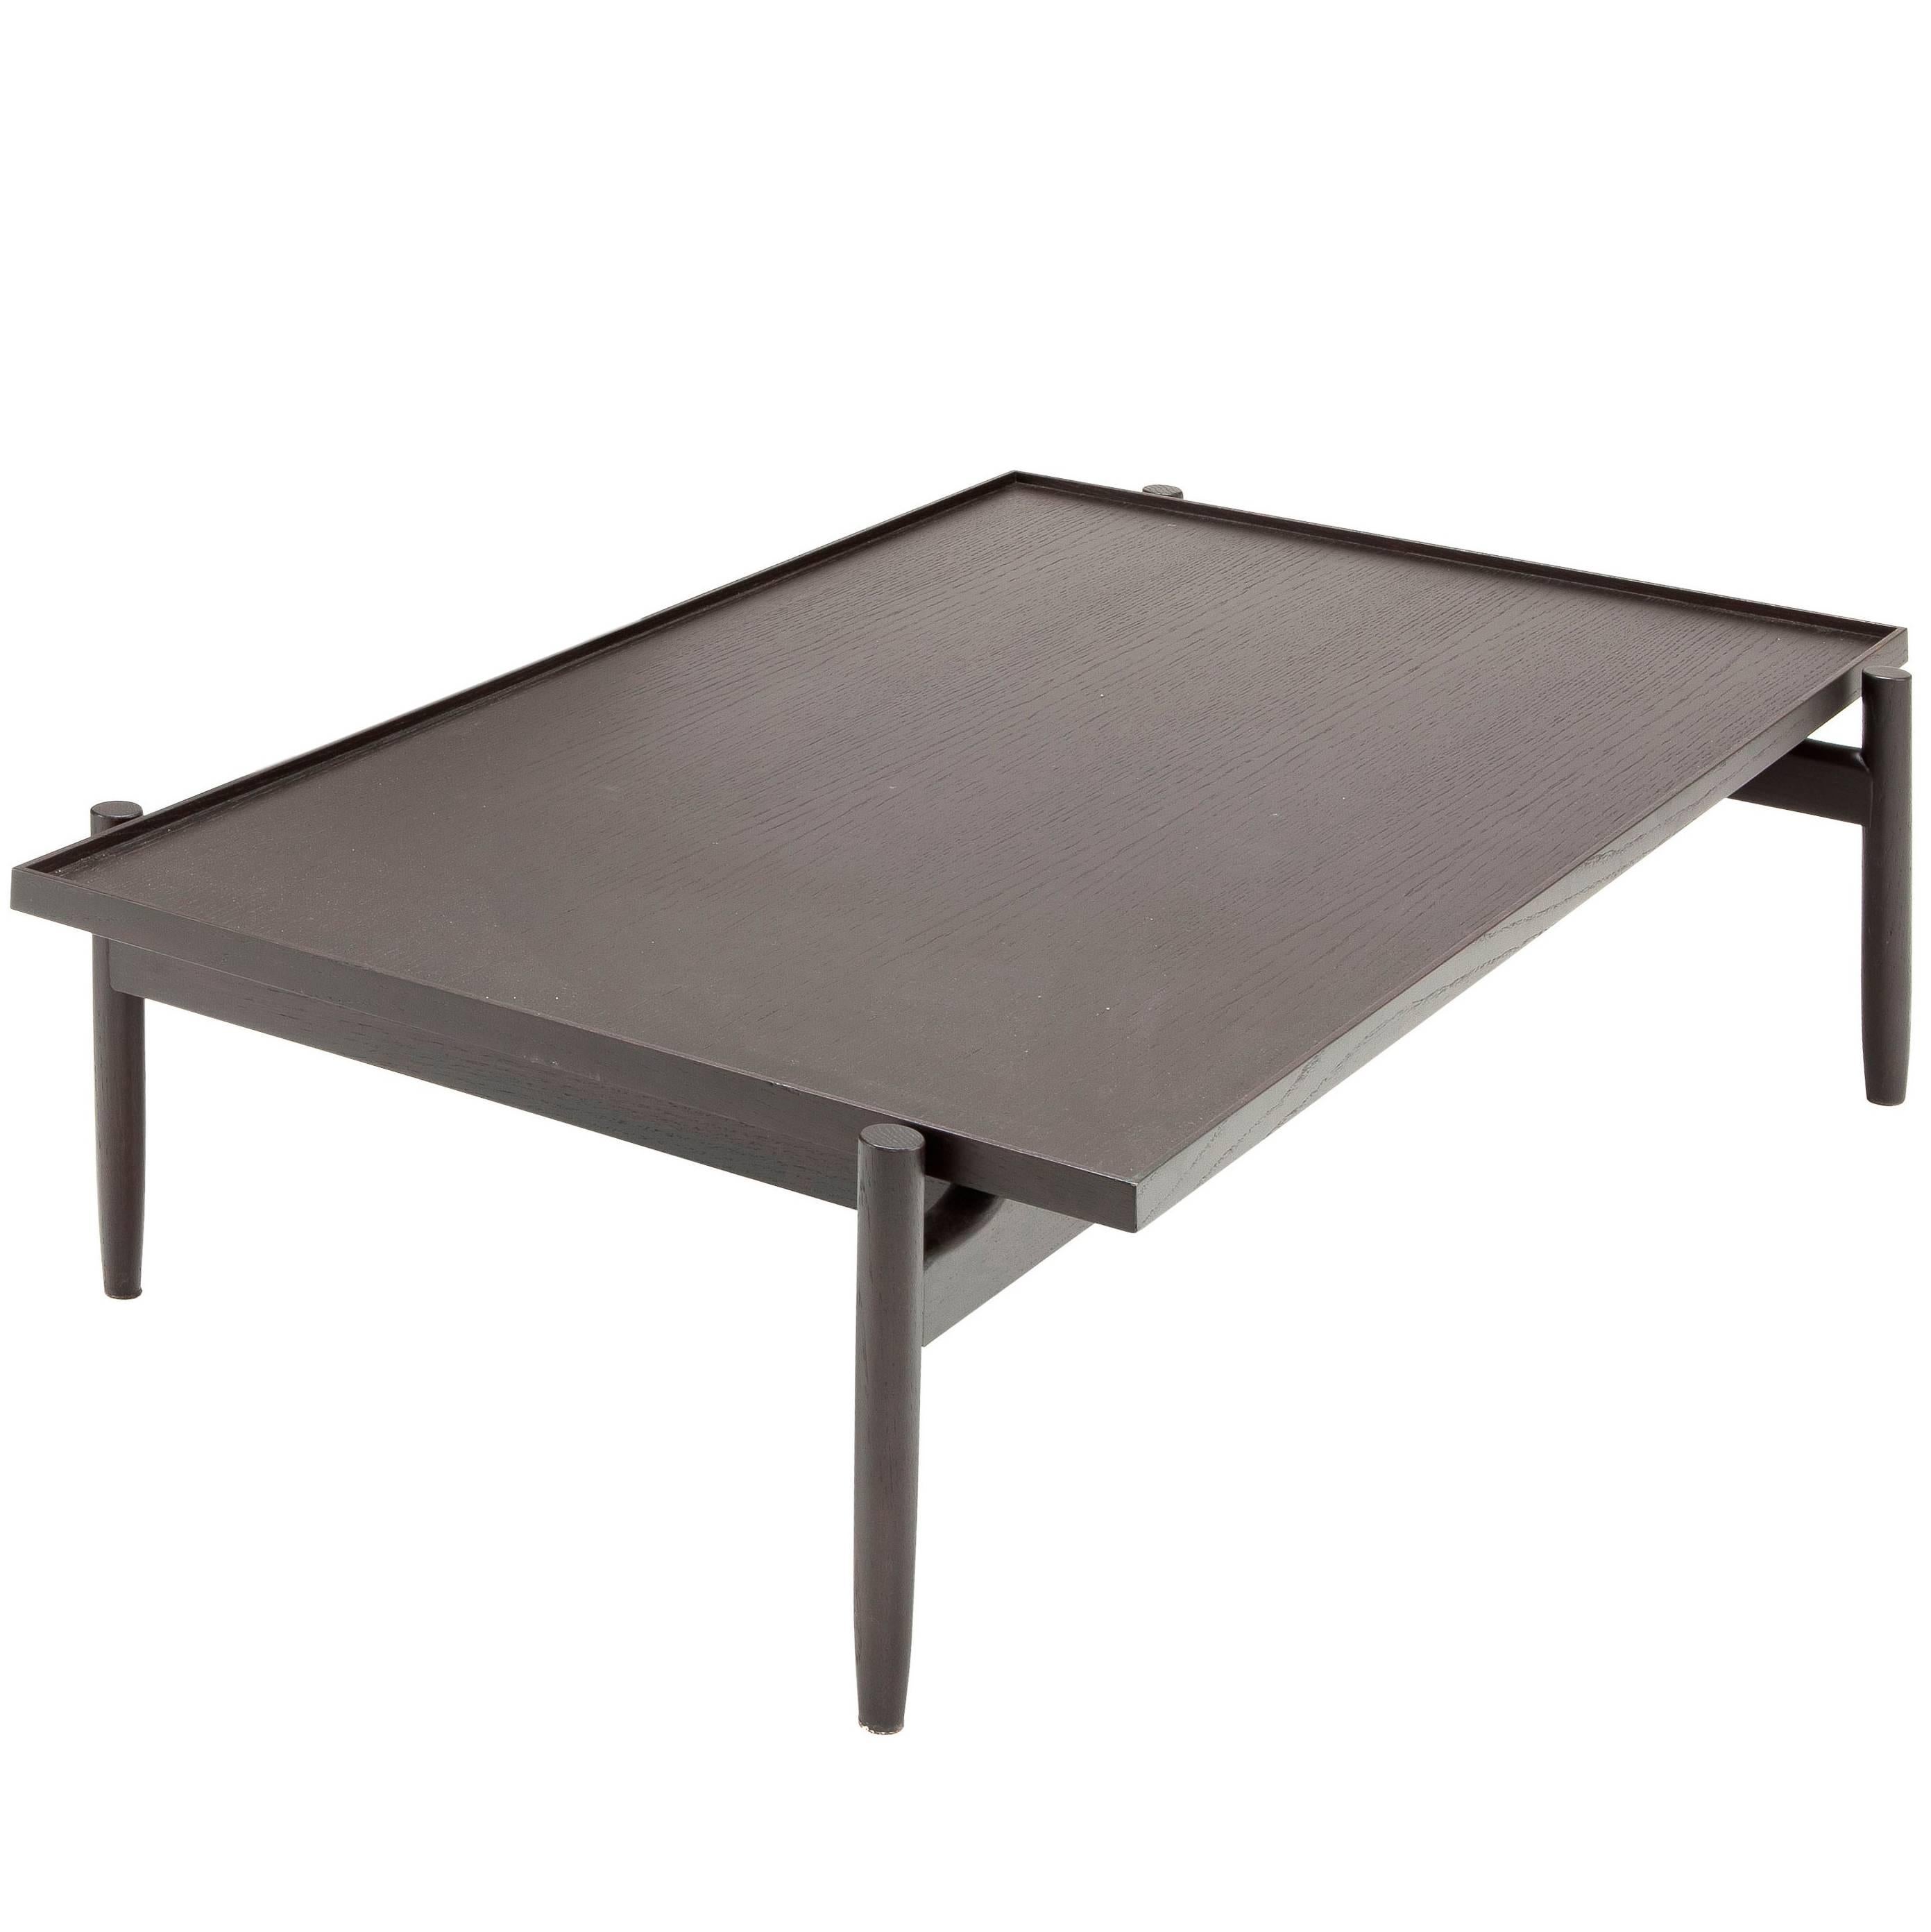 Juli Rectangular Coffee Table by Maurizio Marconato and Terry Zappa For Sale